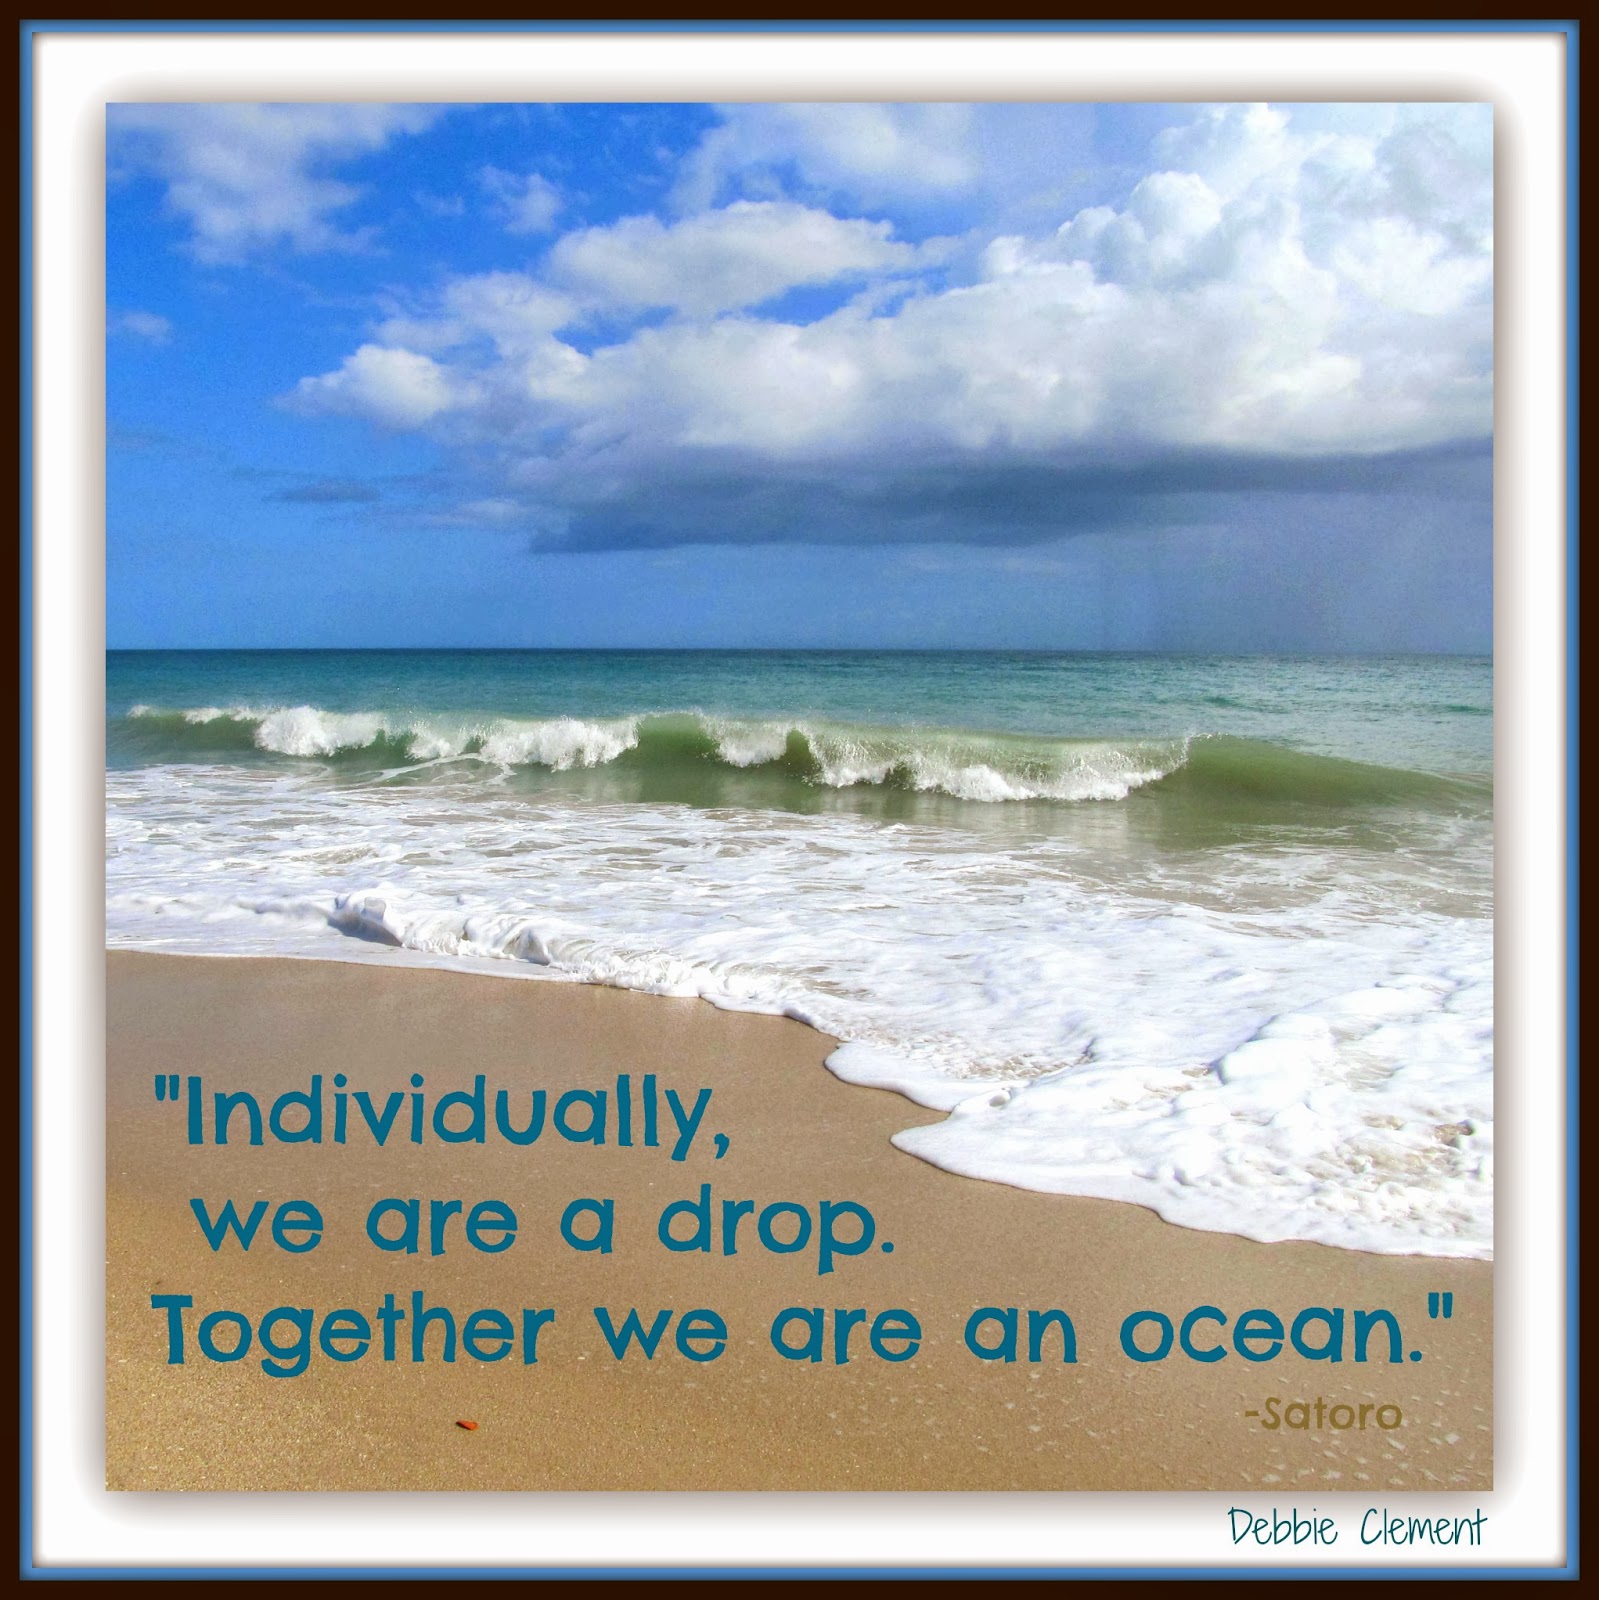 Ocean Quote of Teamwork and Togetherness from Debbie Clement (RainbowsWithinReach) 